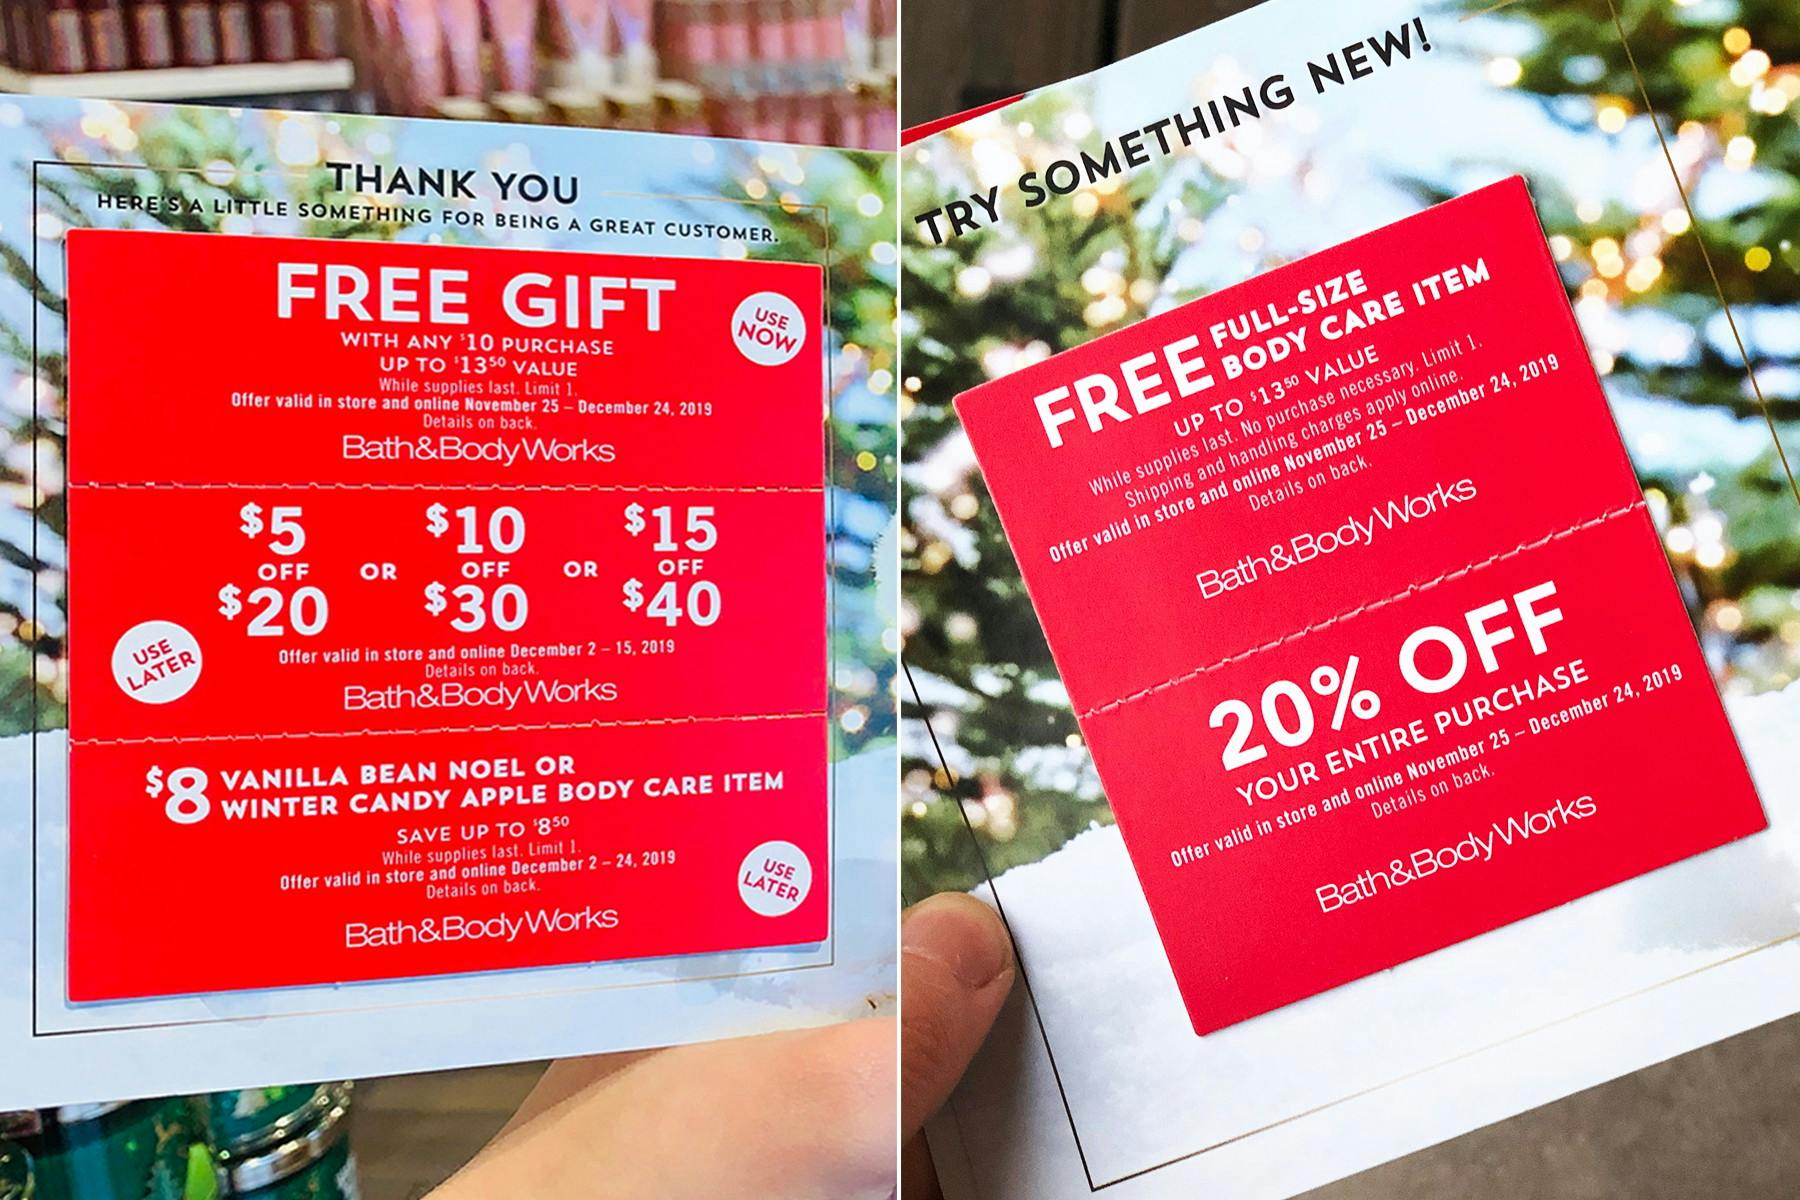 bath and body works online coupons